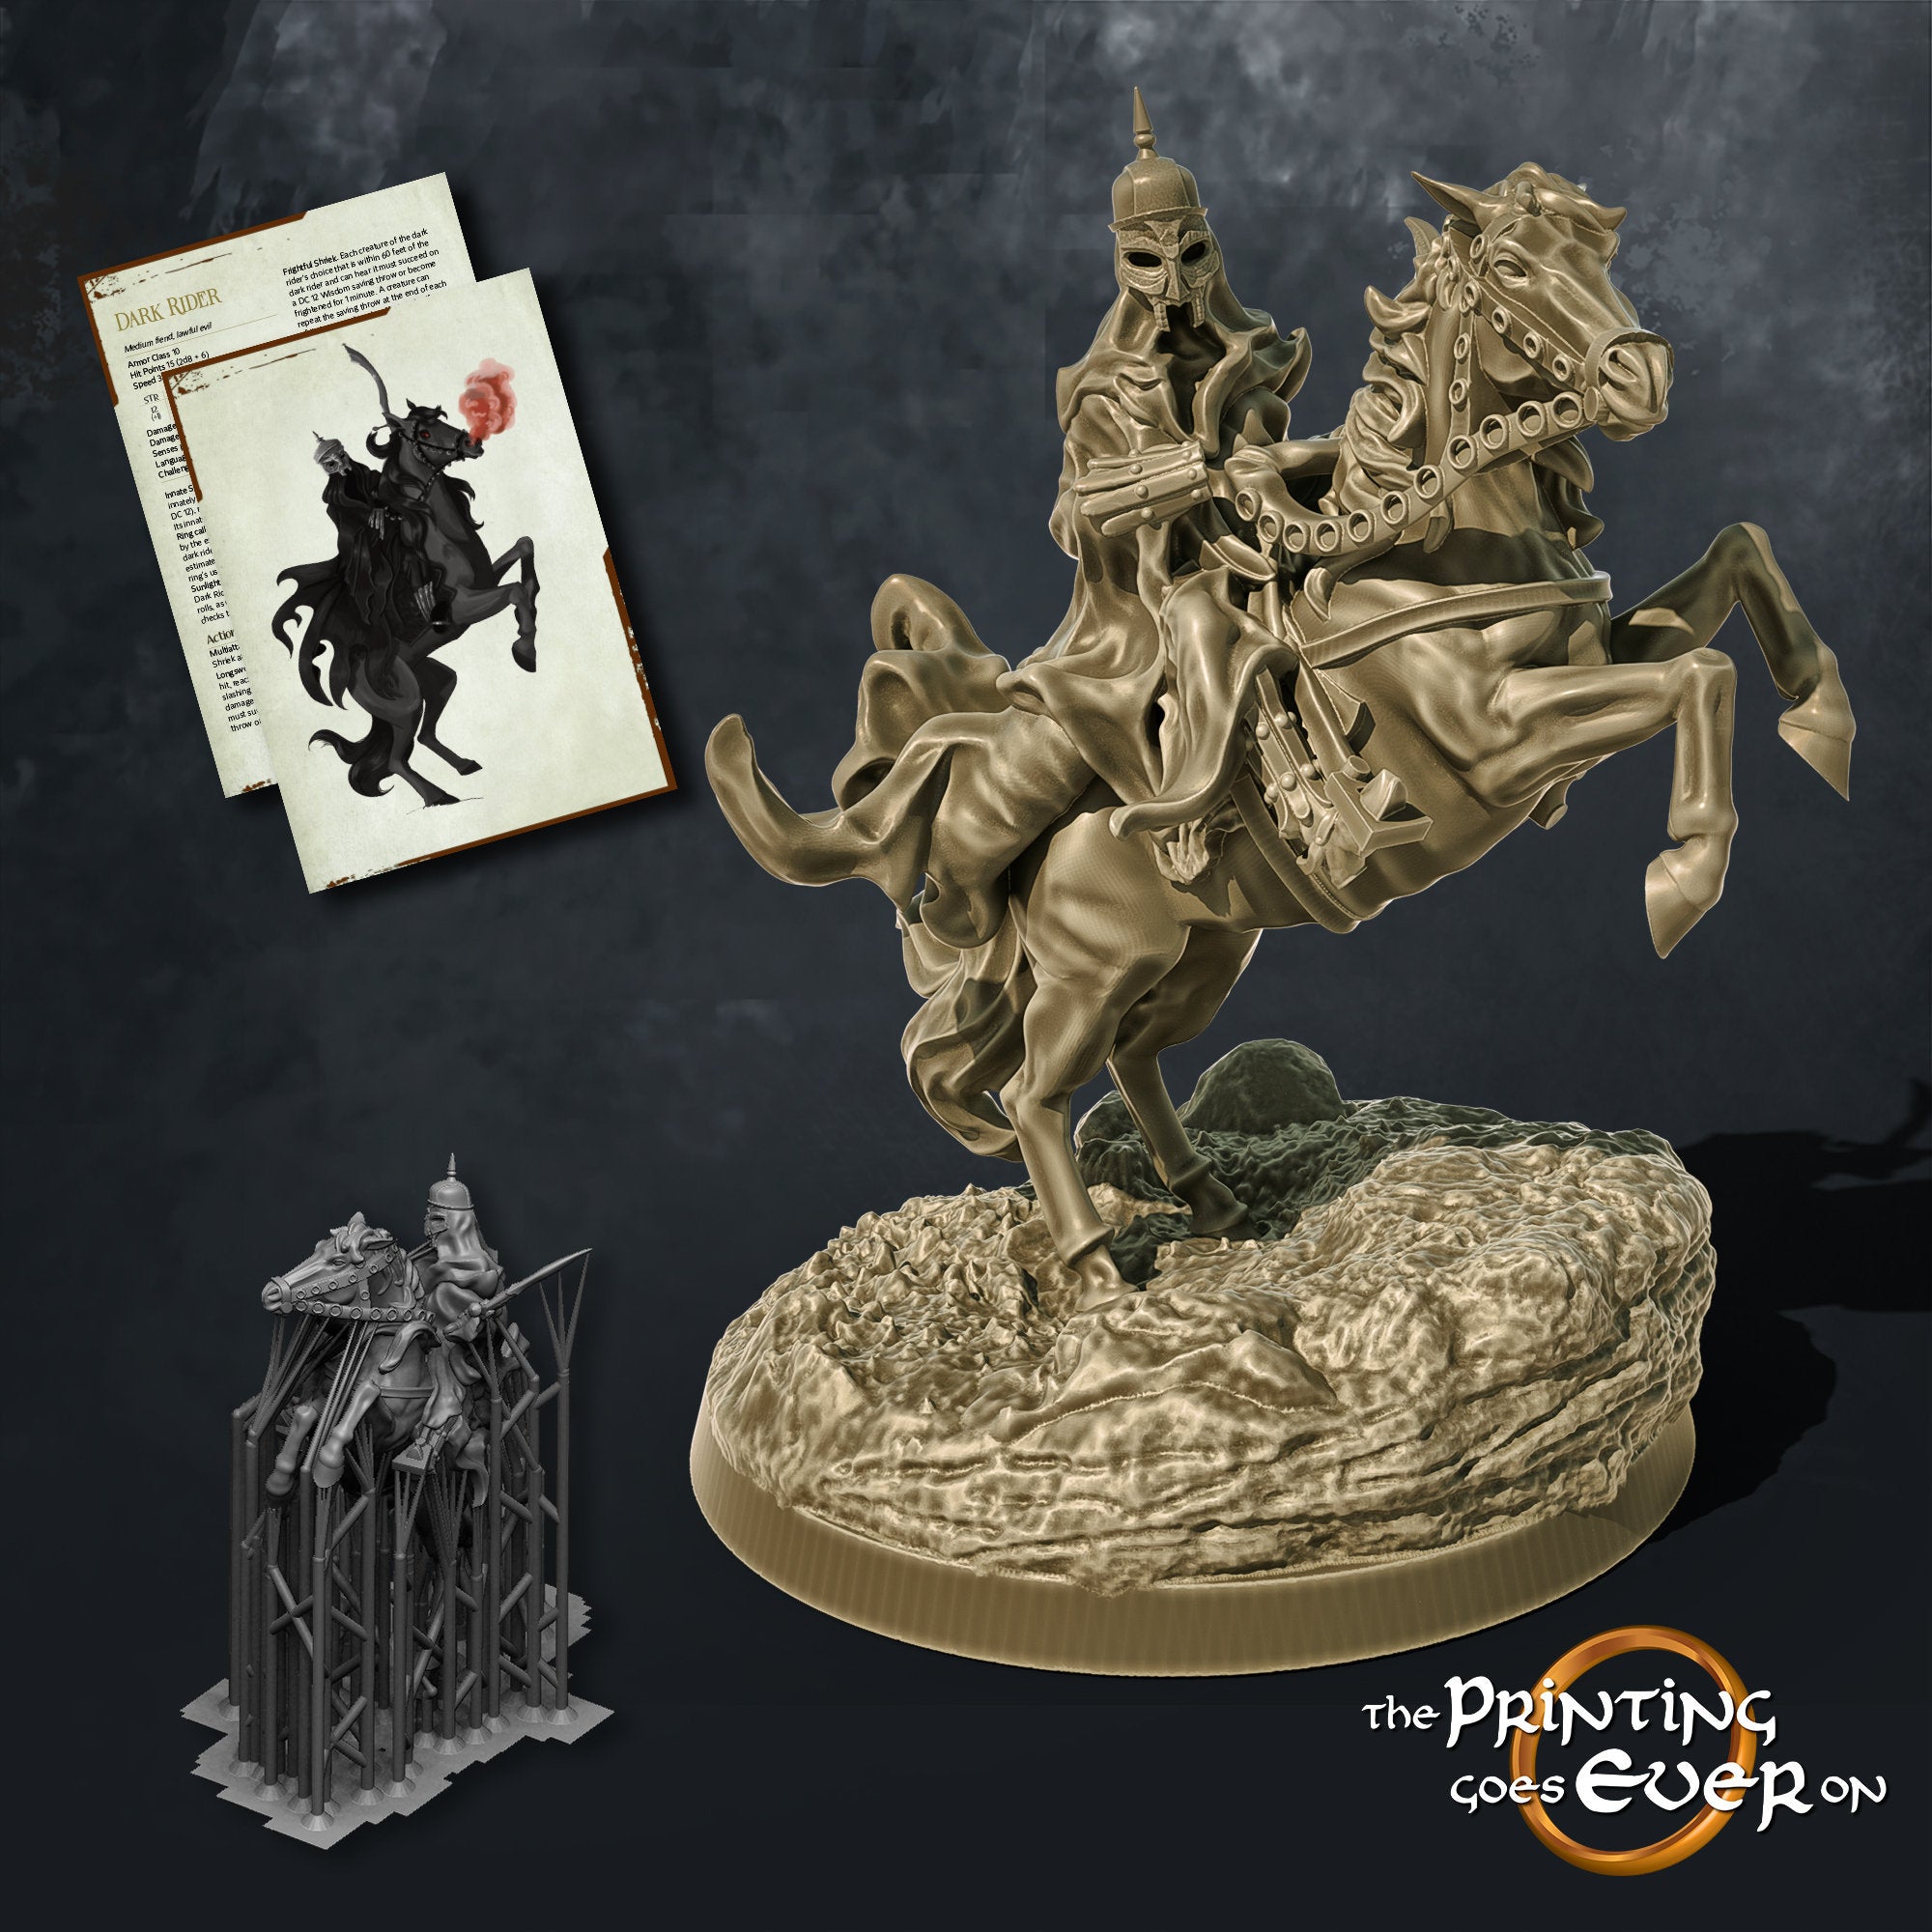 Dark Rider From The Printing Goes Everon